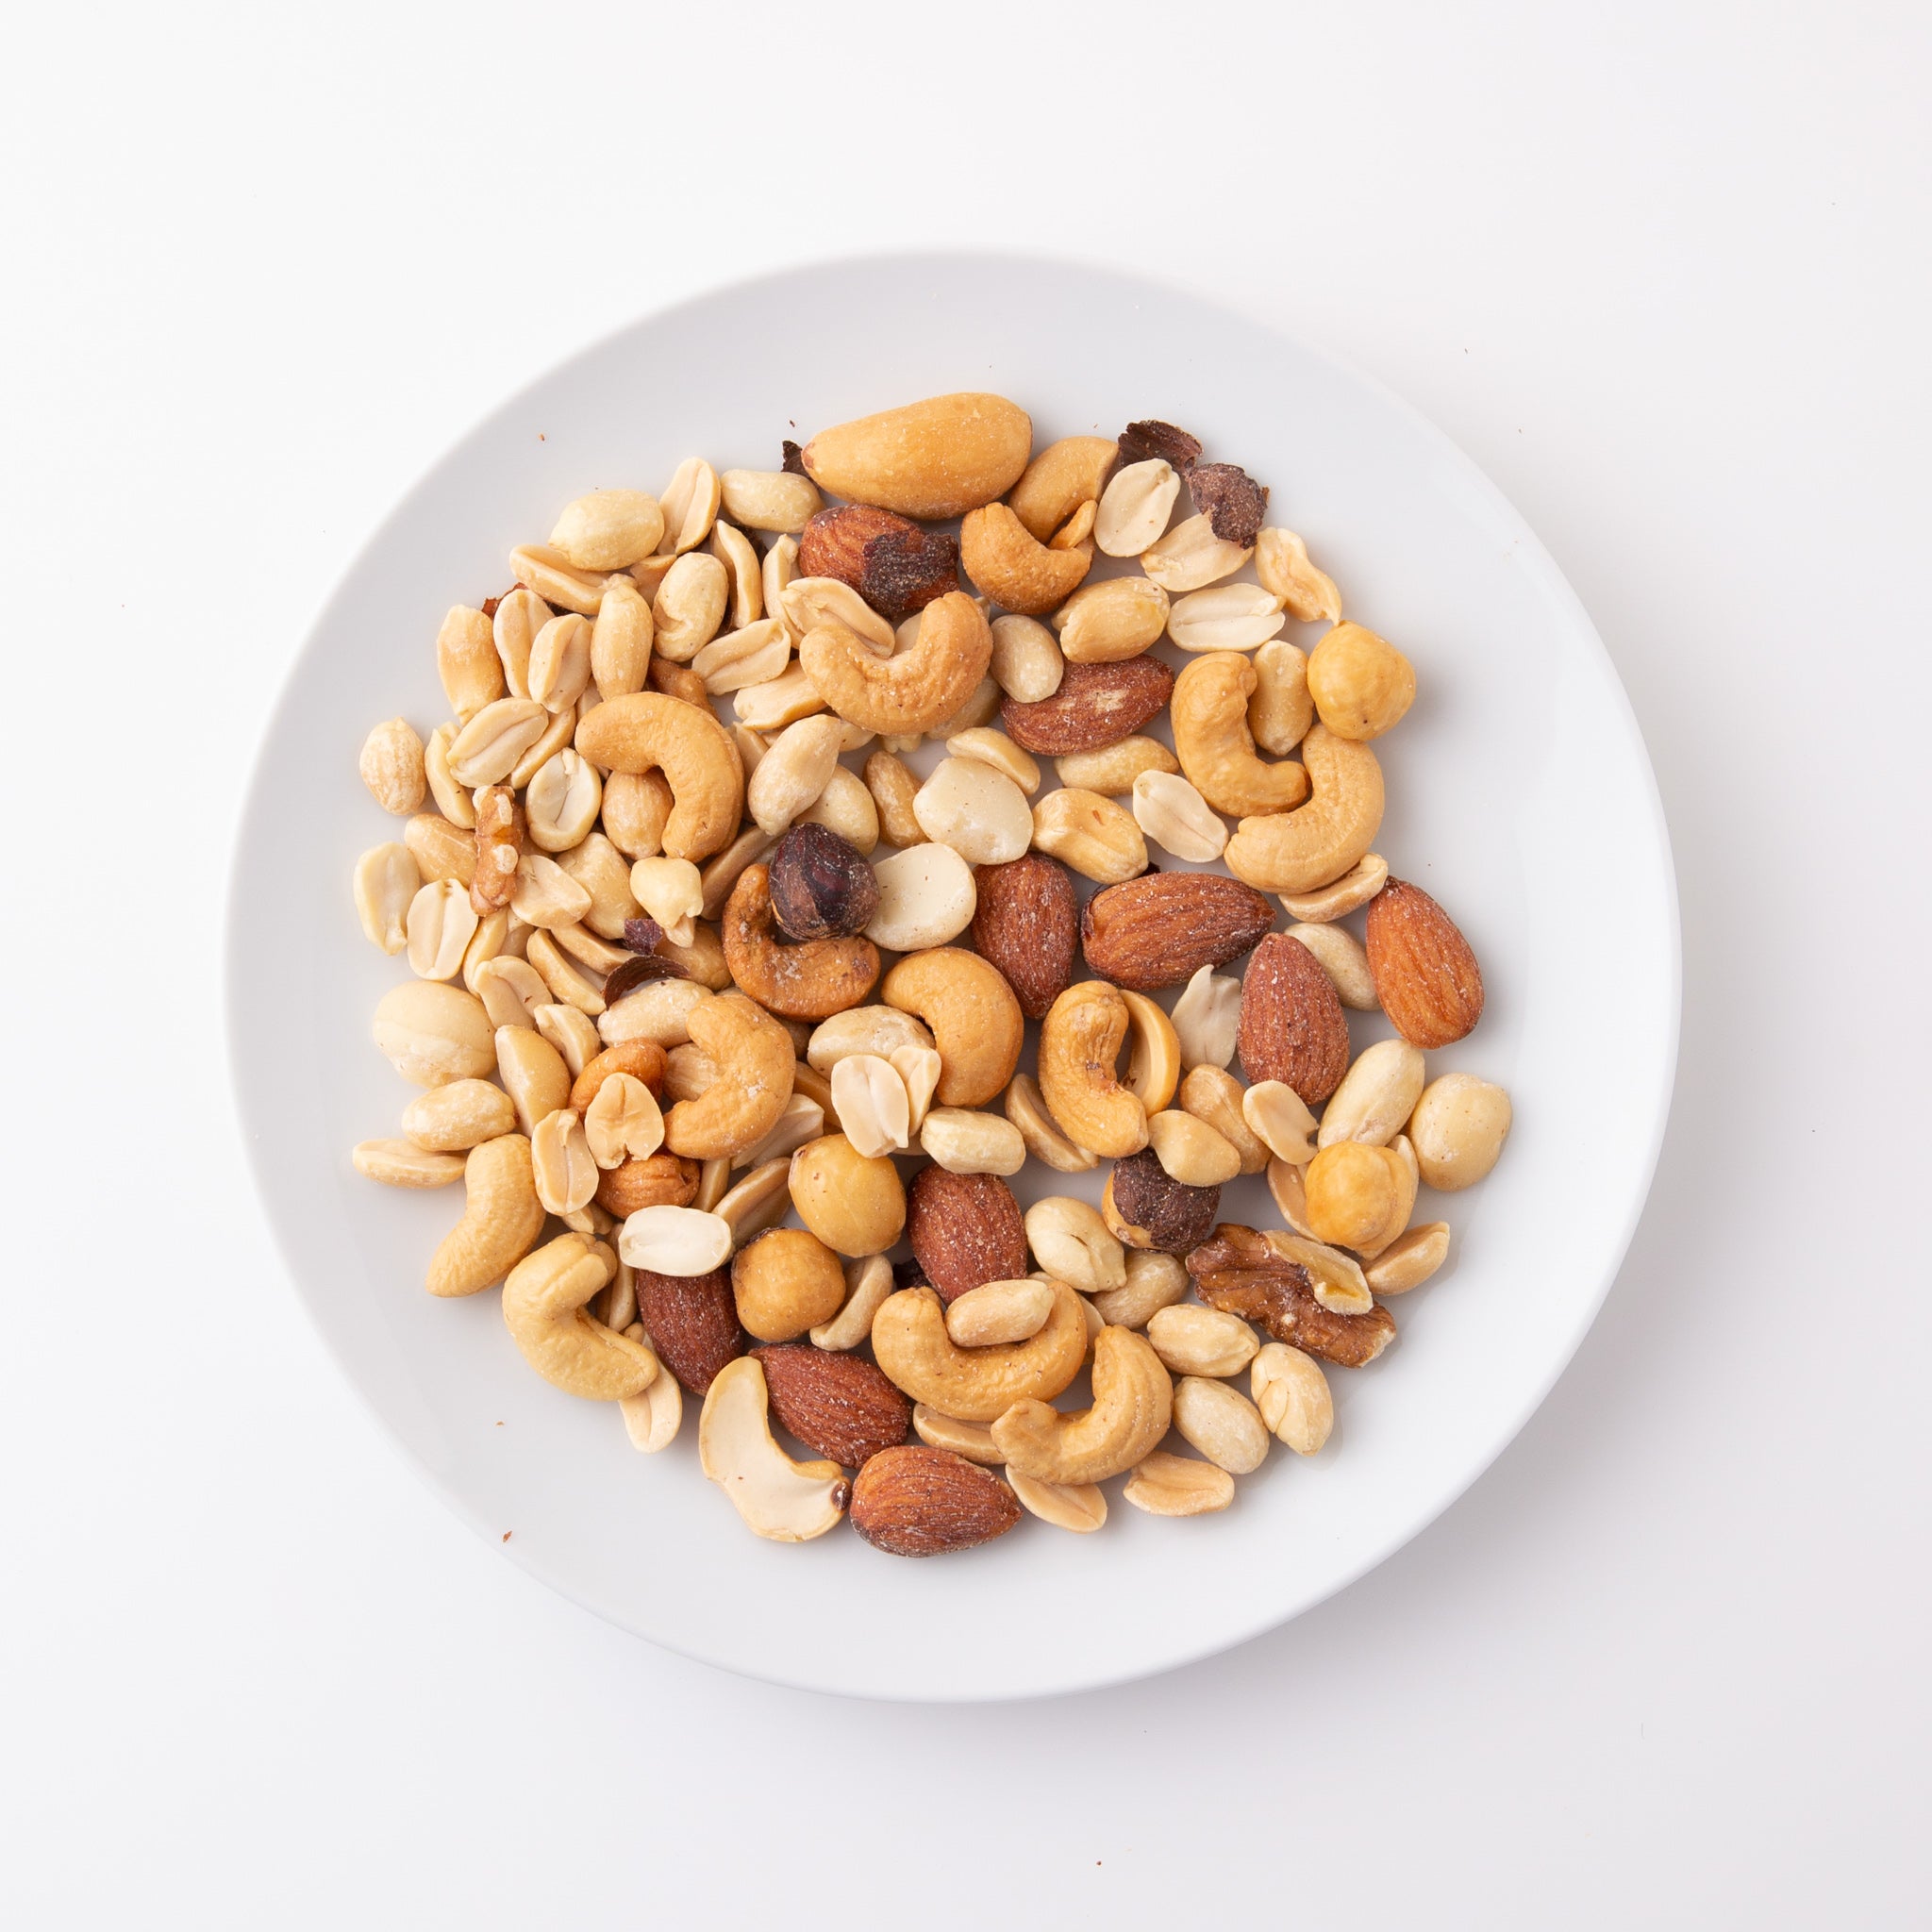 Roasted Unsalted Nut Mix - With Peanuts (Roasted Nuts) Image 3 - Naked Foods